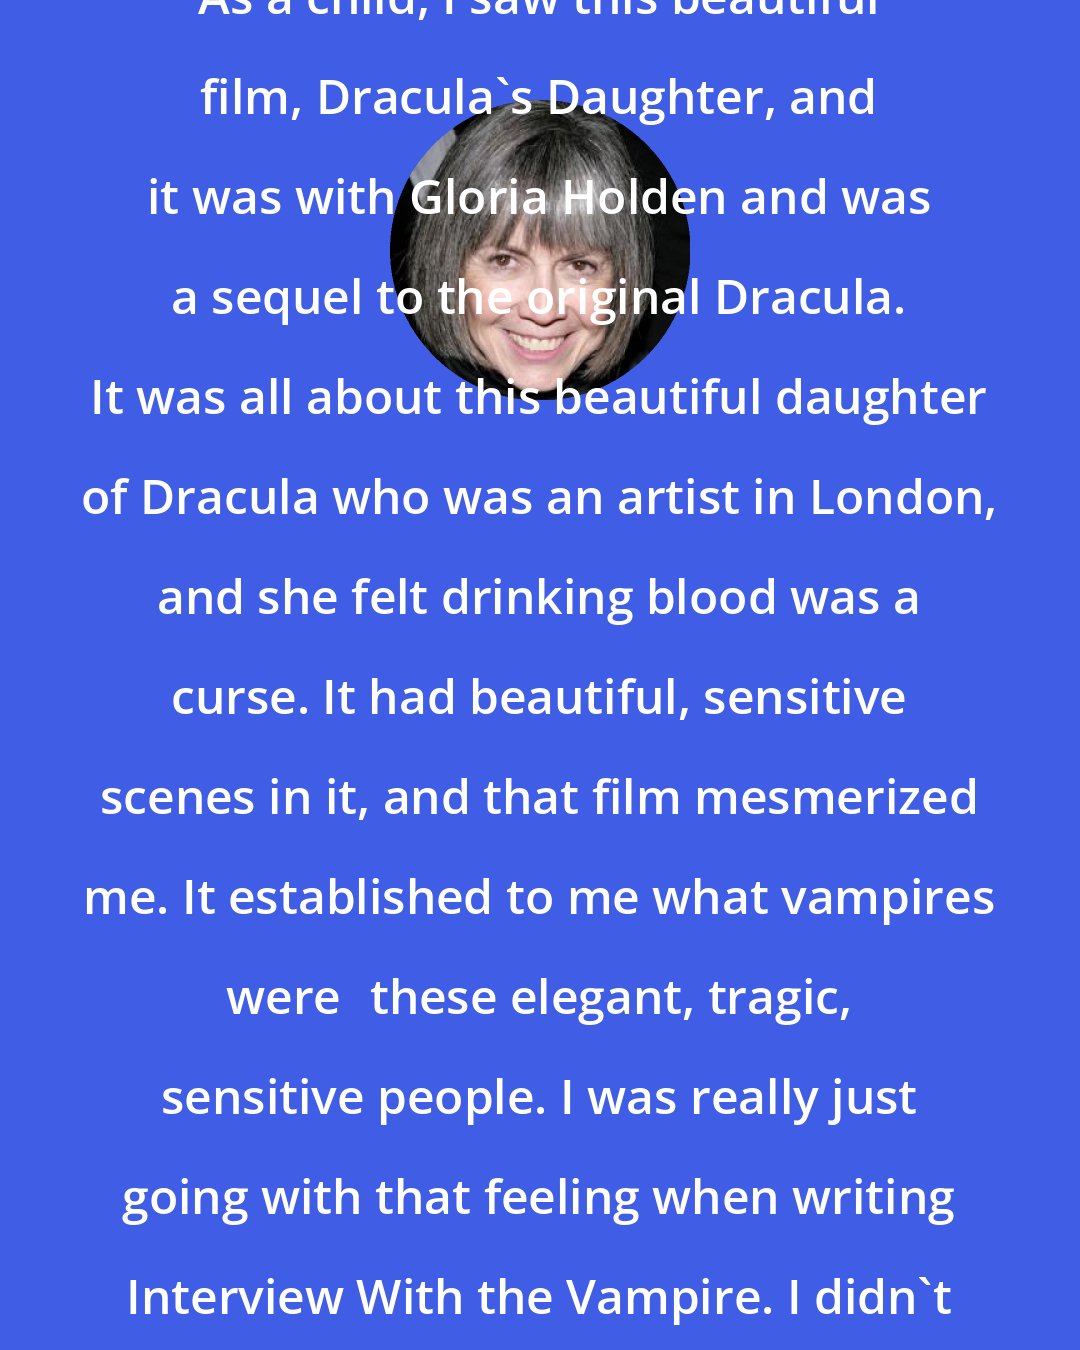 Anne Rice: As a child, I saw this beautiful film, Dracula's Daughter, and it was with Gloria Holden and was a sequel to the original Dracula. It was all about this beautiful daughter of Dracula who was an artist in London, and she felt drinking blood was a curse. It had beautiful, sensitive scenes in it, and that film mesmerized me. It established to me what vampires werethese elegant, tragic, sensitive people. I was really just going with that feeling when writing Interview With the Vampire. I didn't do a lot of research.